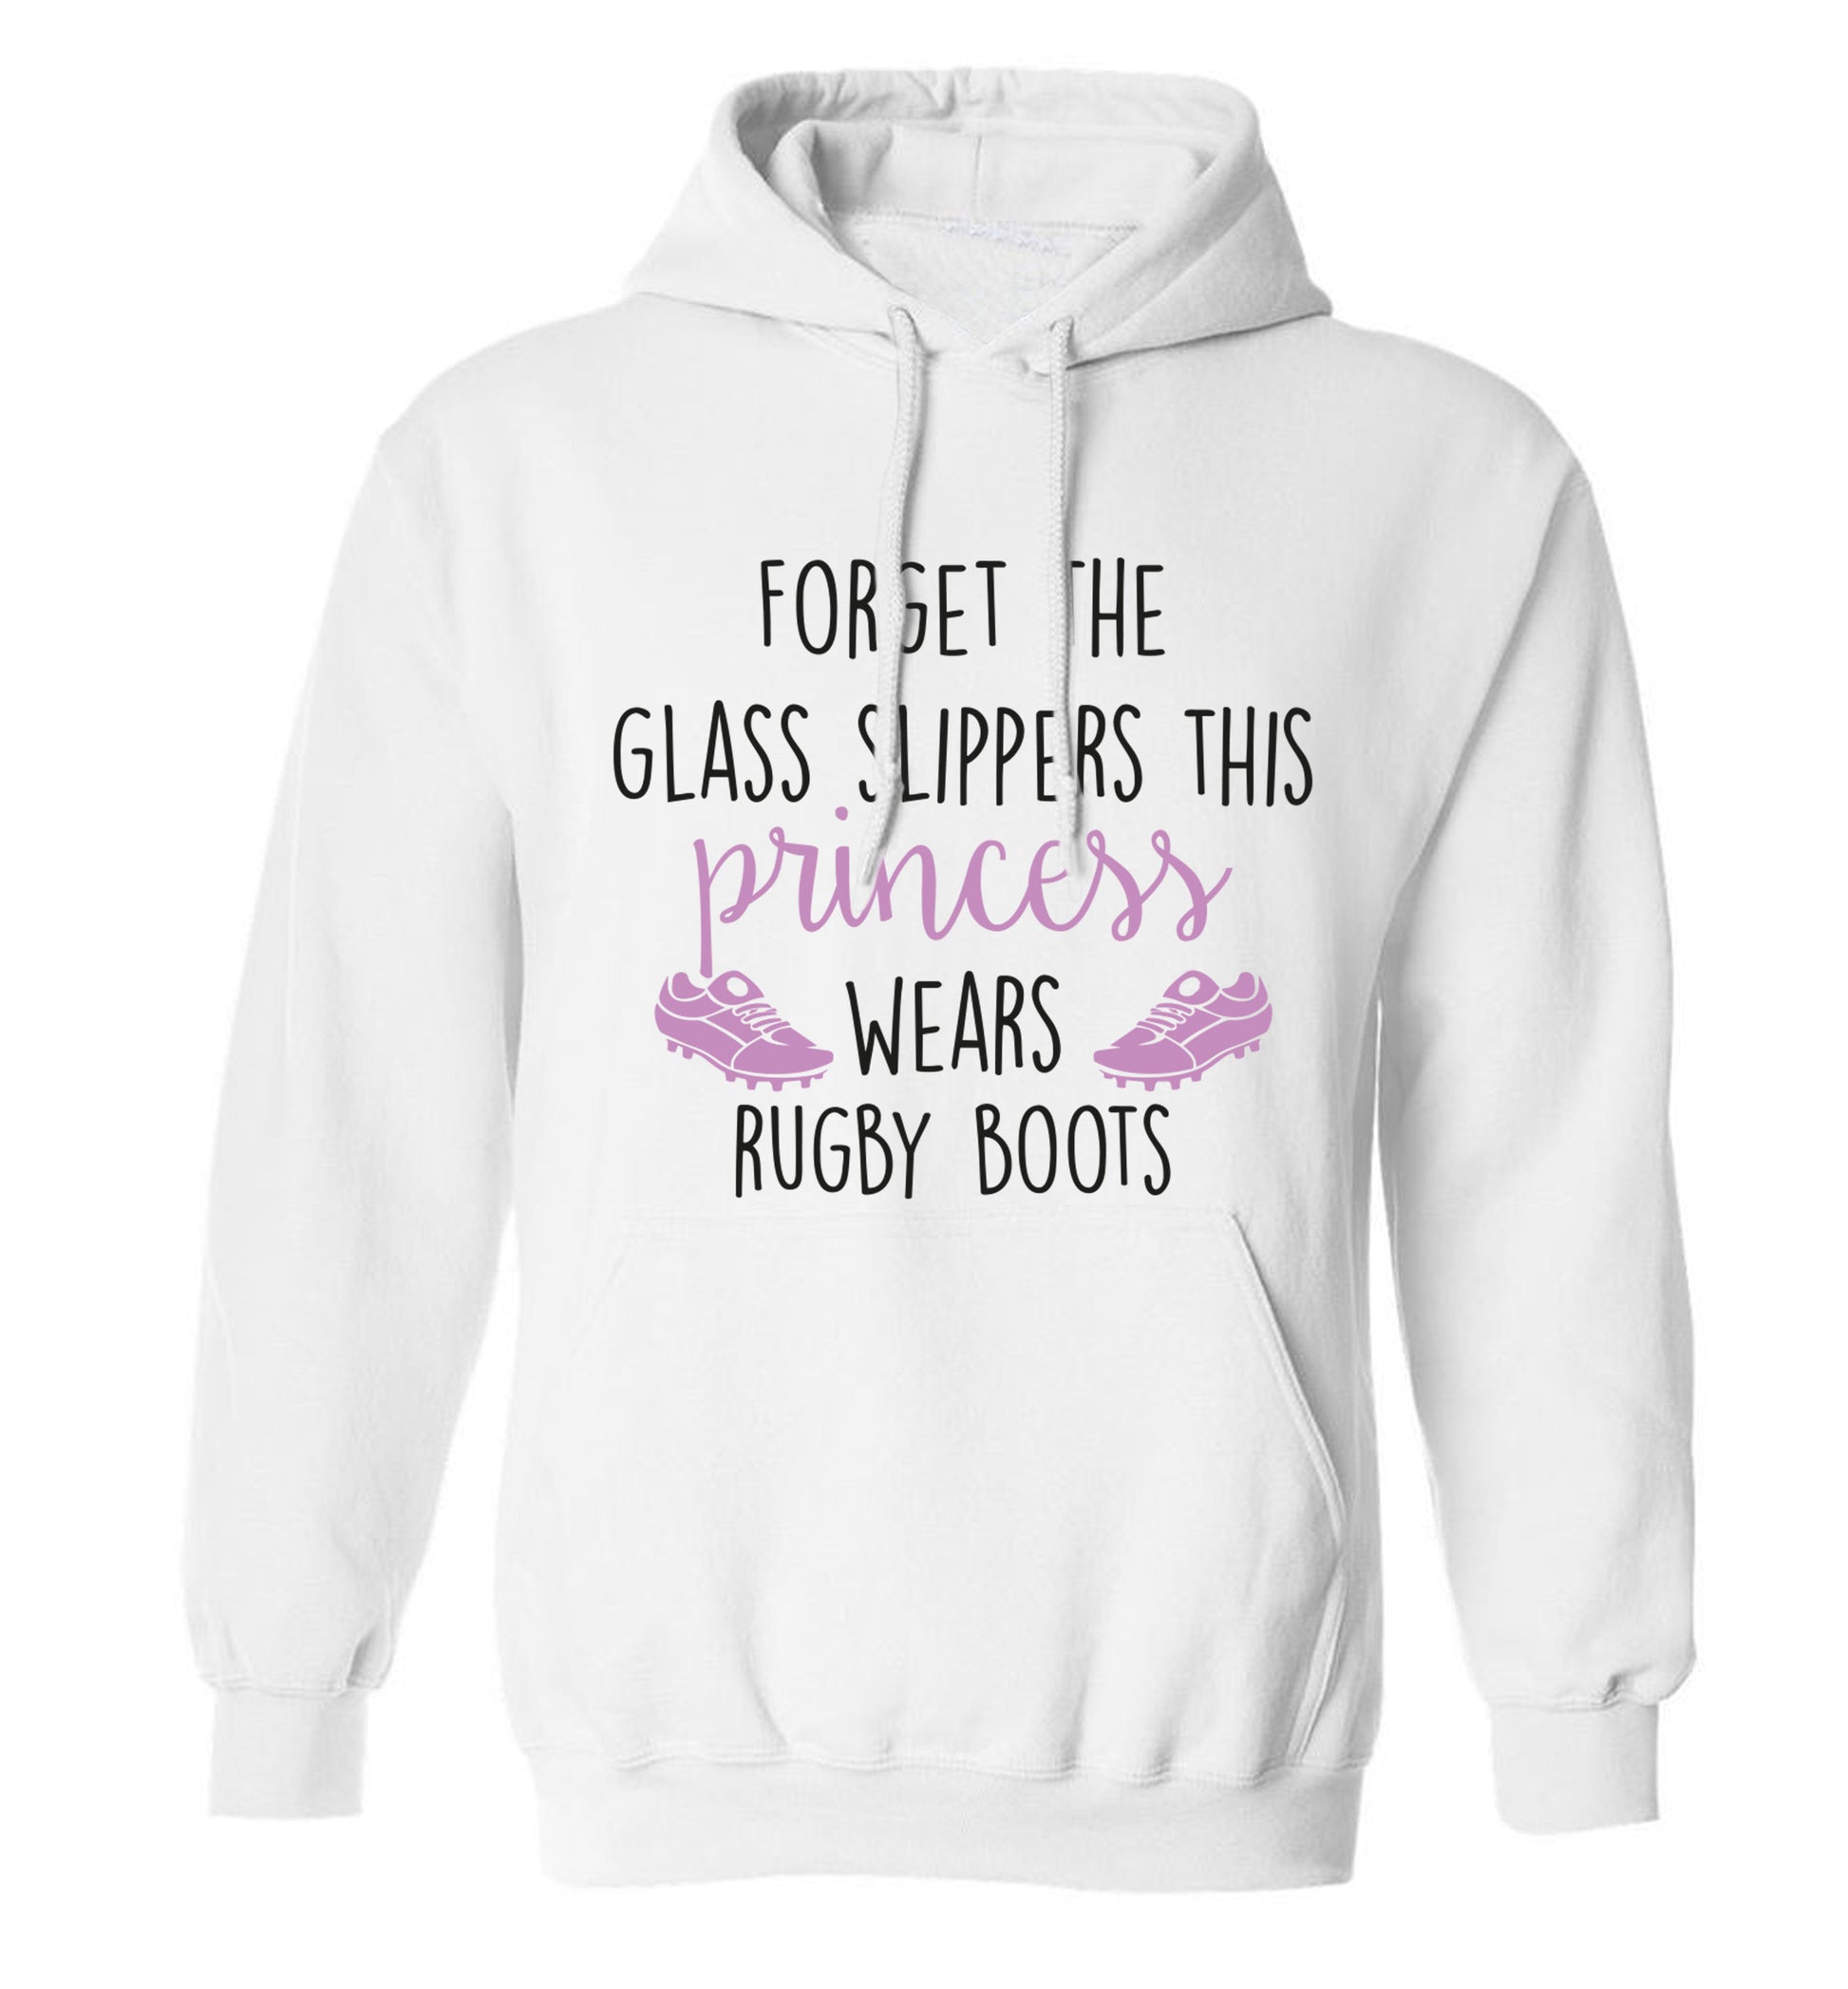 Forget the glass slippers this princess wears rugby boots adults unisex white hoodie 2XL